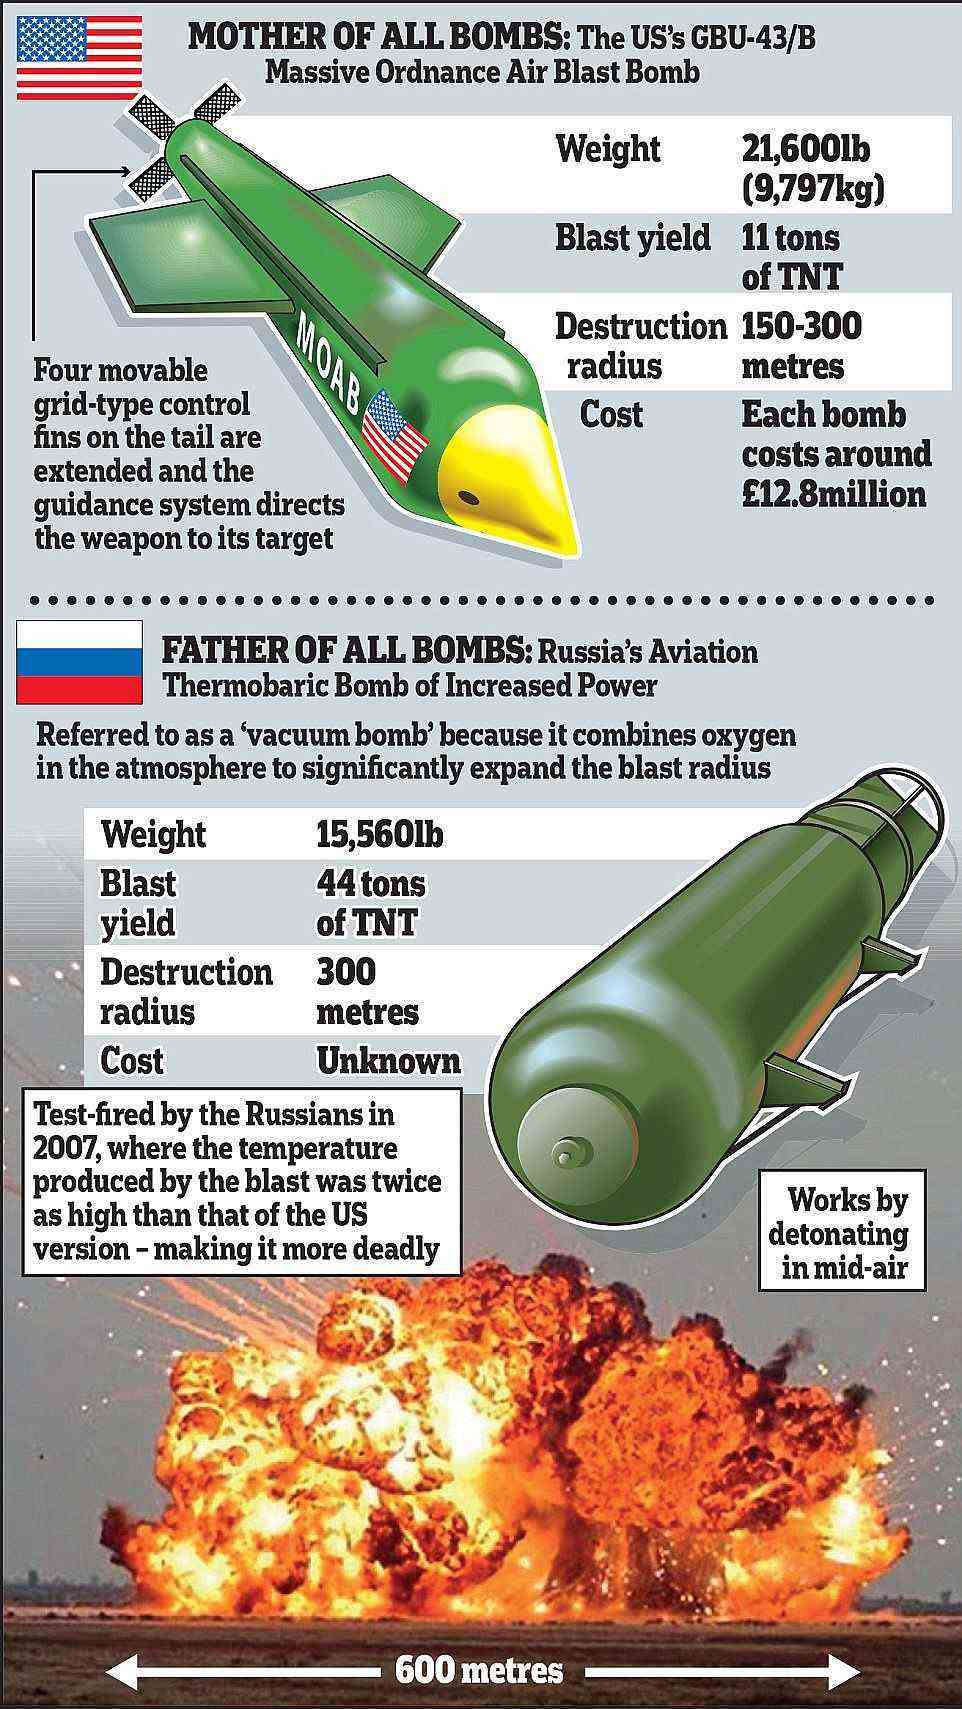 Father of all bombs comparison with mother of all bombs, also known as GBU-43/B MOAB, developed for the US and first deployed in 2017